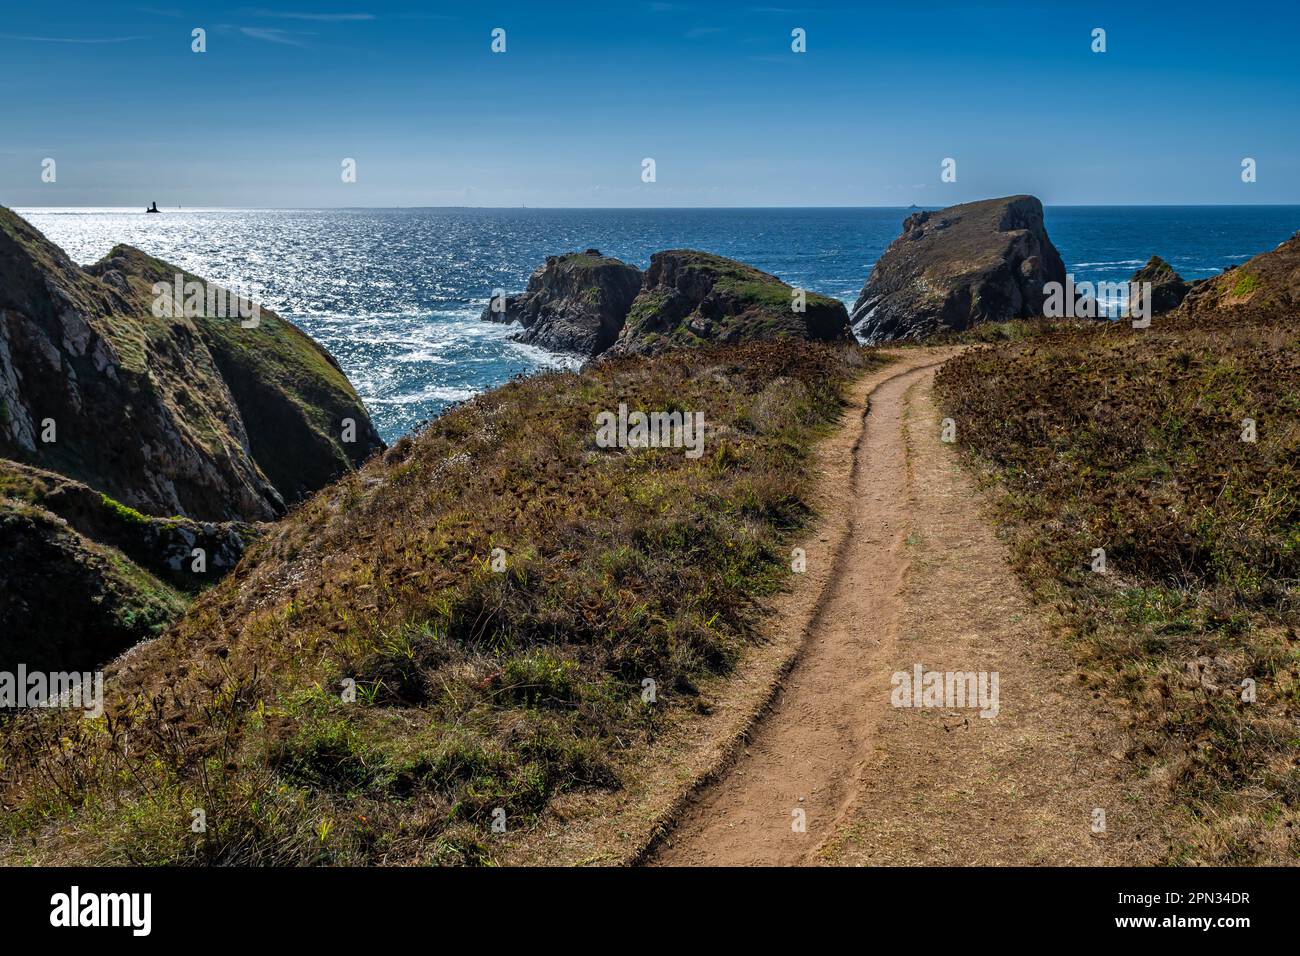 Coastal Hiking Path With Spectacular Cliffs At Peninsula Pointe Du Van On Cap Sizun At The Finistere Atlantic Coast In Brittany, France Stock Photo